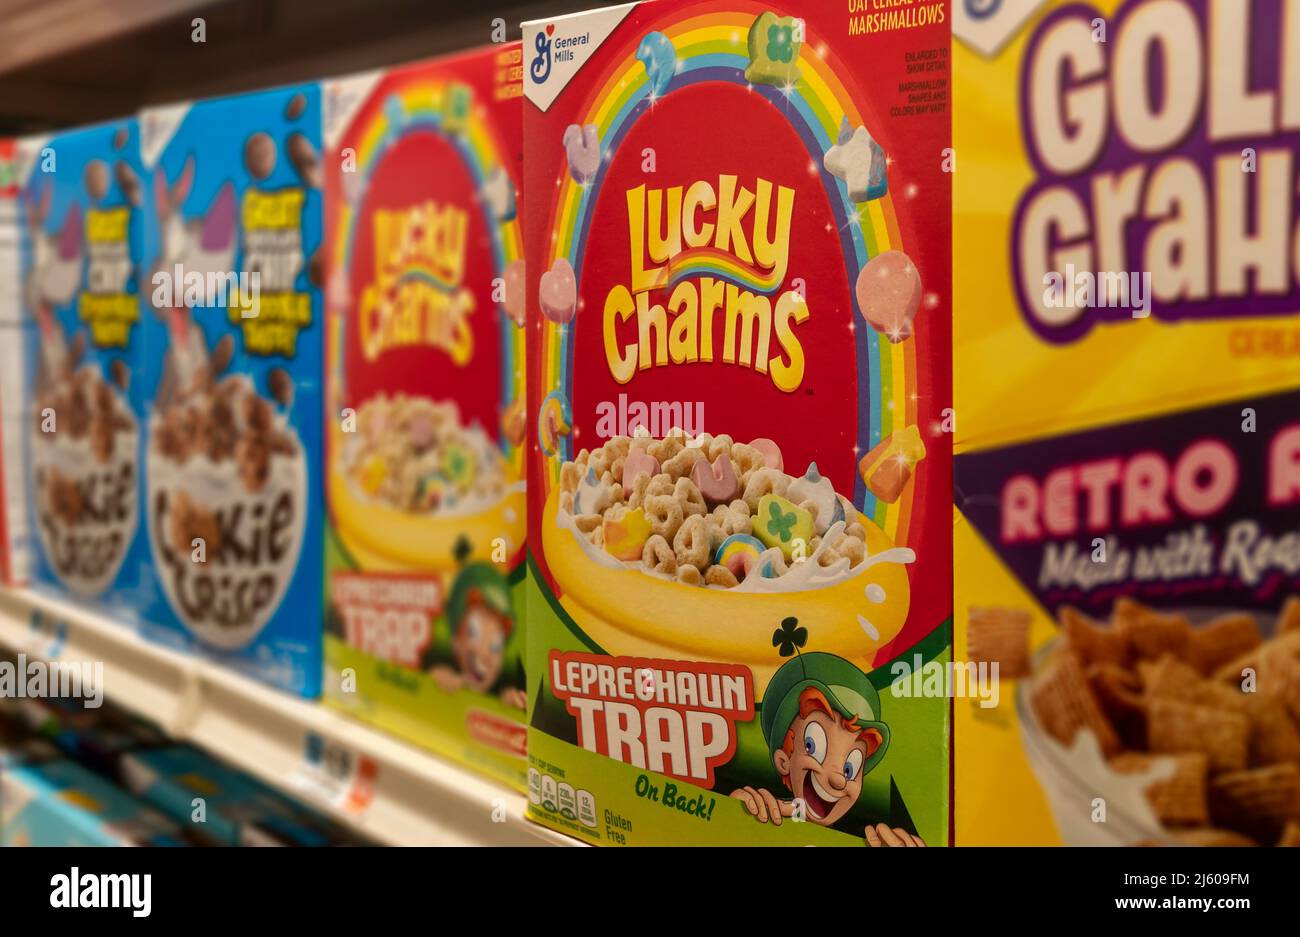 Boxes of General Mills breakfast cereals including Lucky Charms displayed on supermarket shelves in New York on Monday, April 18, 2022. The US Food and Drug Administration announced it was investigating after receiving thousands of reports that people had become ill after eating the cereal.(© Richard B. Levine) Stock Photo